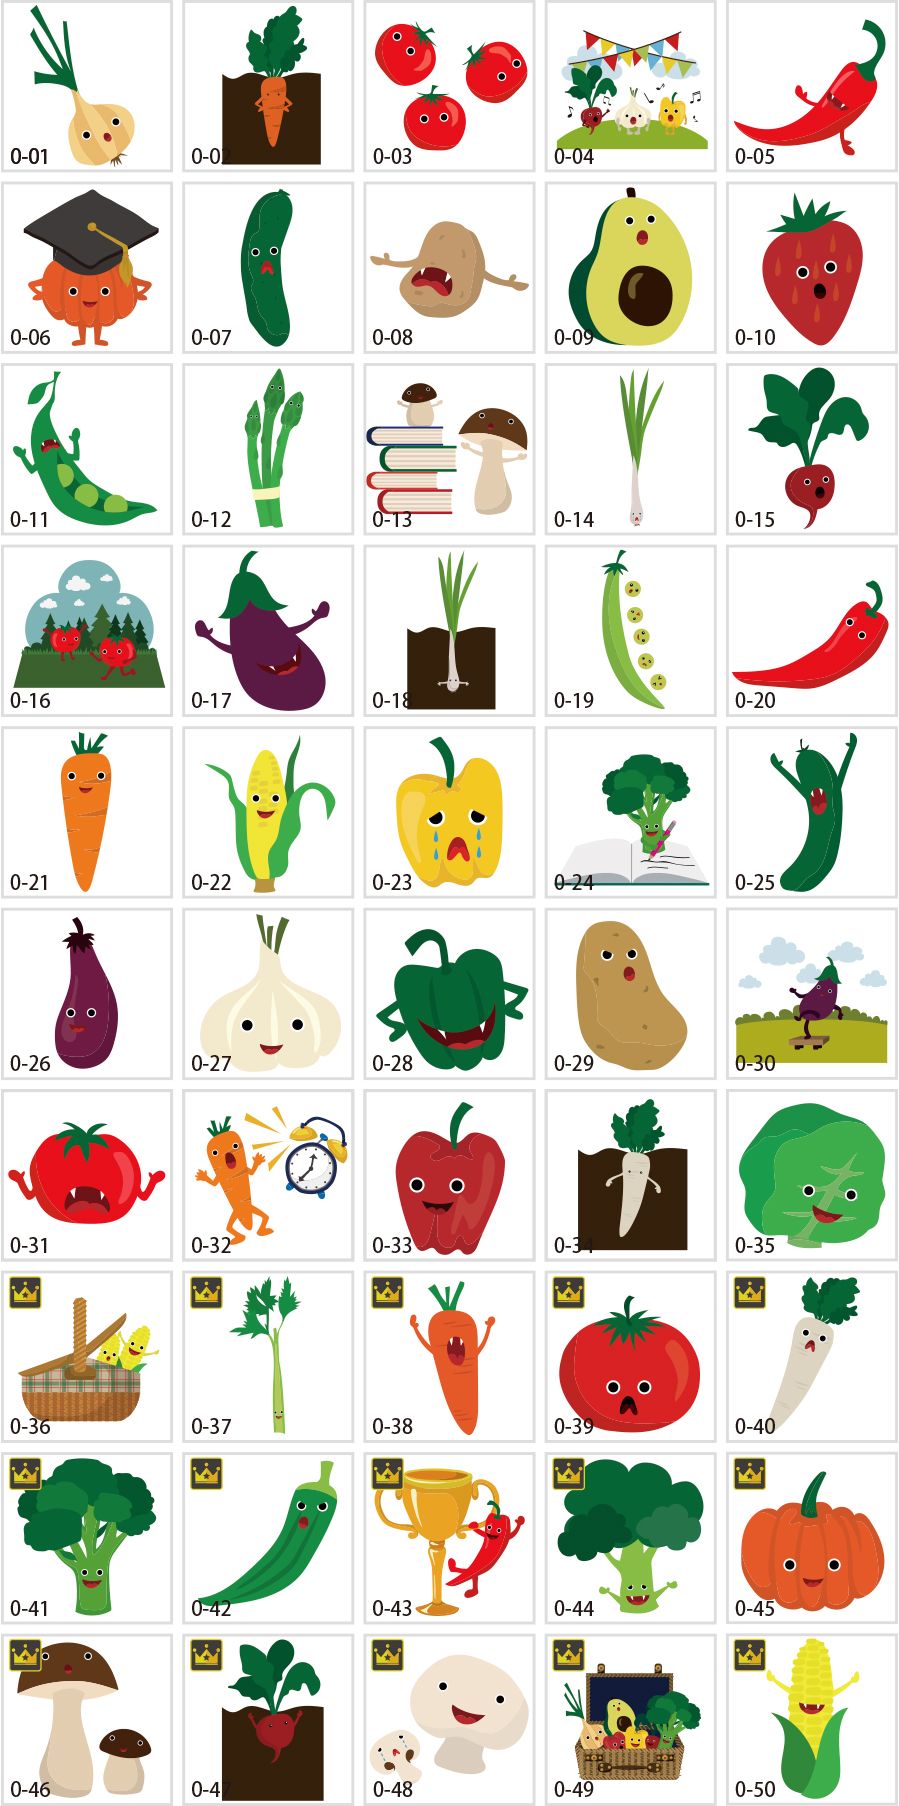 Illustration of vegetable character